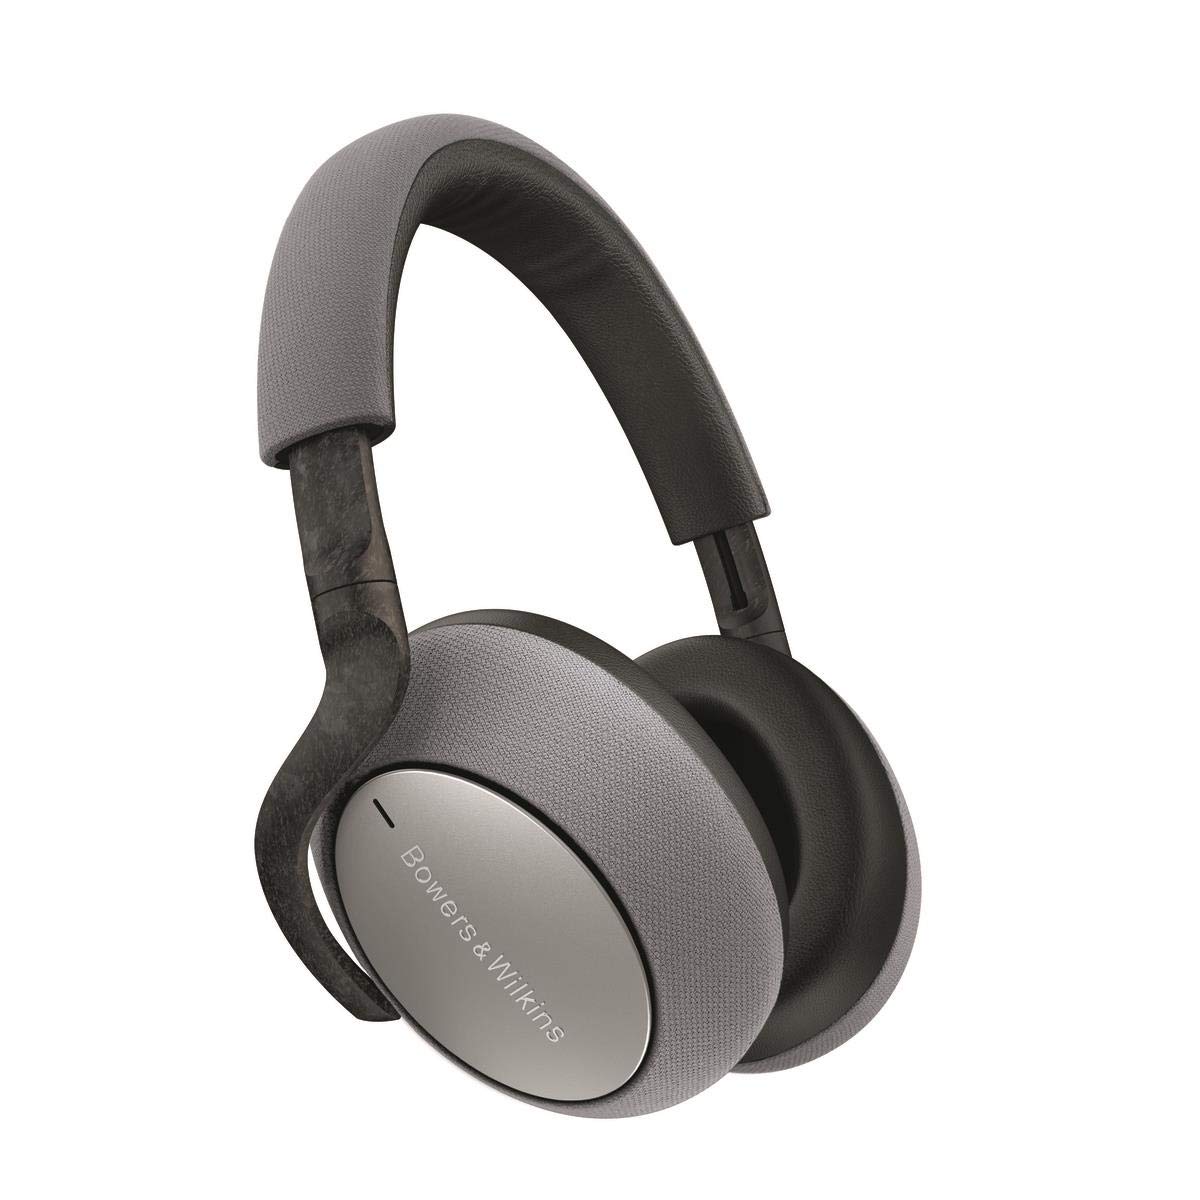 Bowers & Wilkins PX7 Over Ear Wireless Bluetooth Headphone Adaptive Noise Cancelling